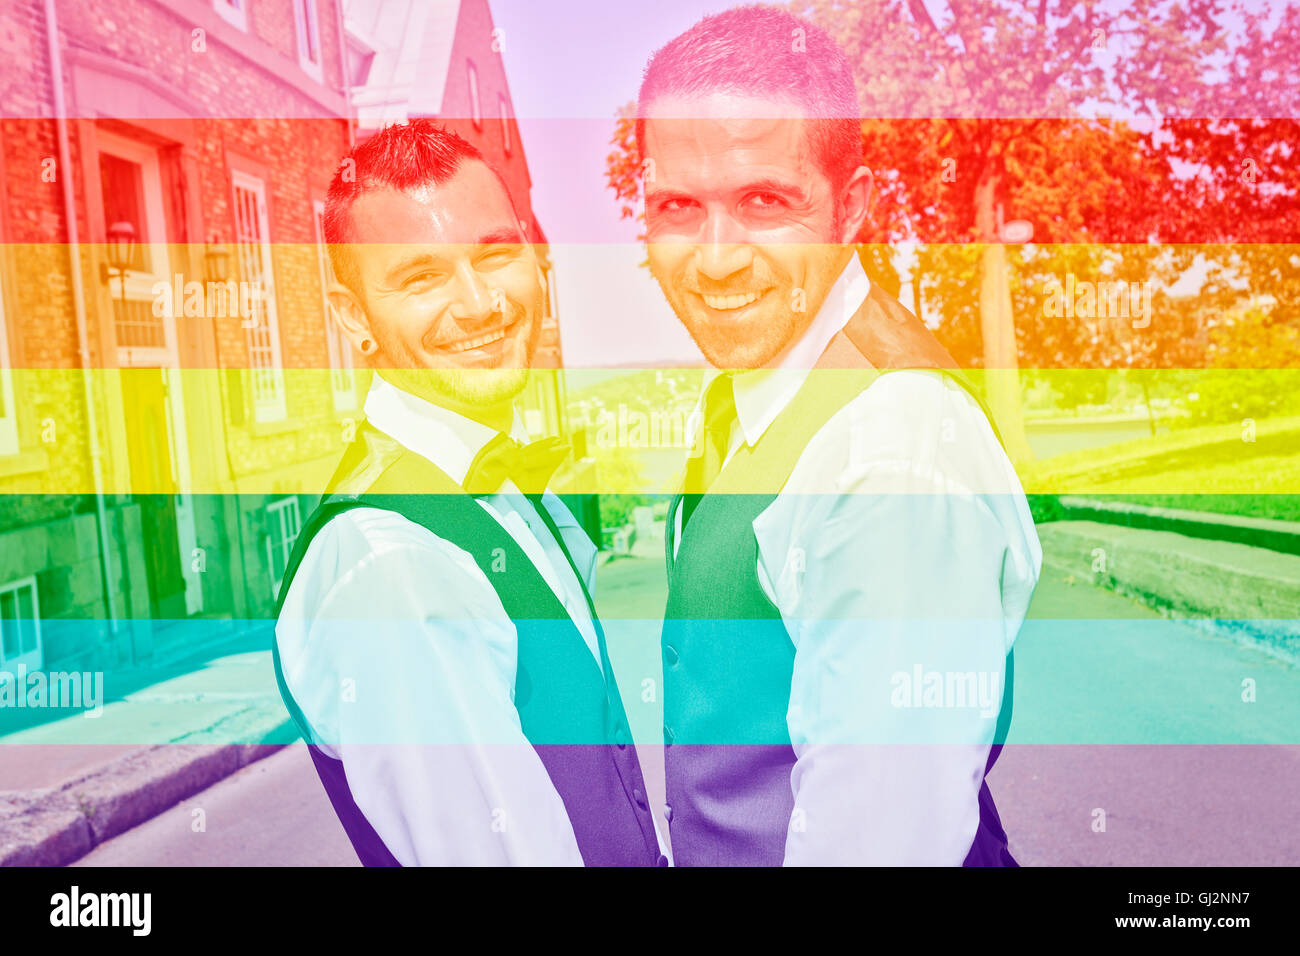 A Portrait of a loving gay male couple on their wedding day. The photo is taked on the Quebec city street. Stock Photo